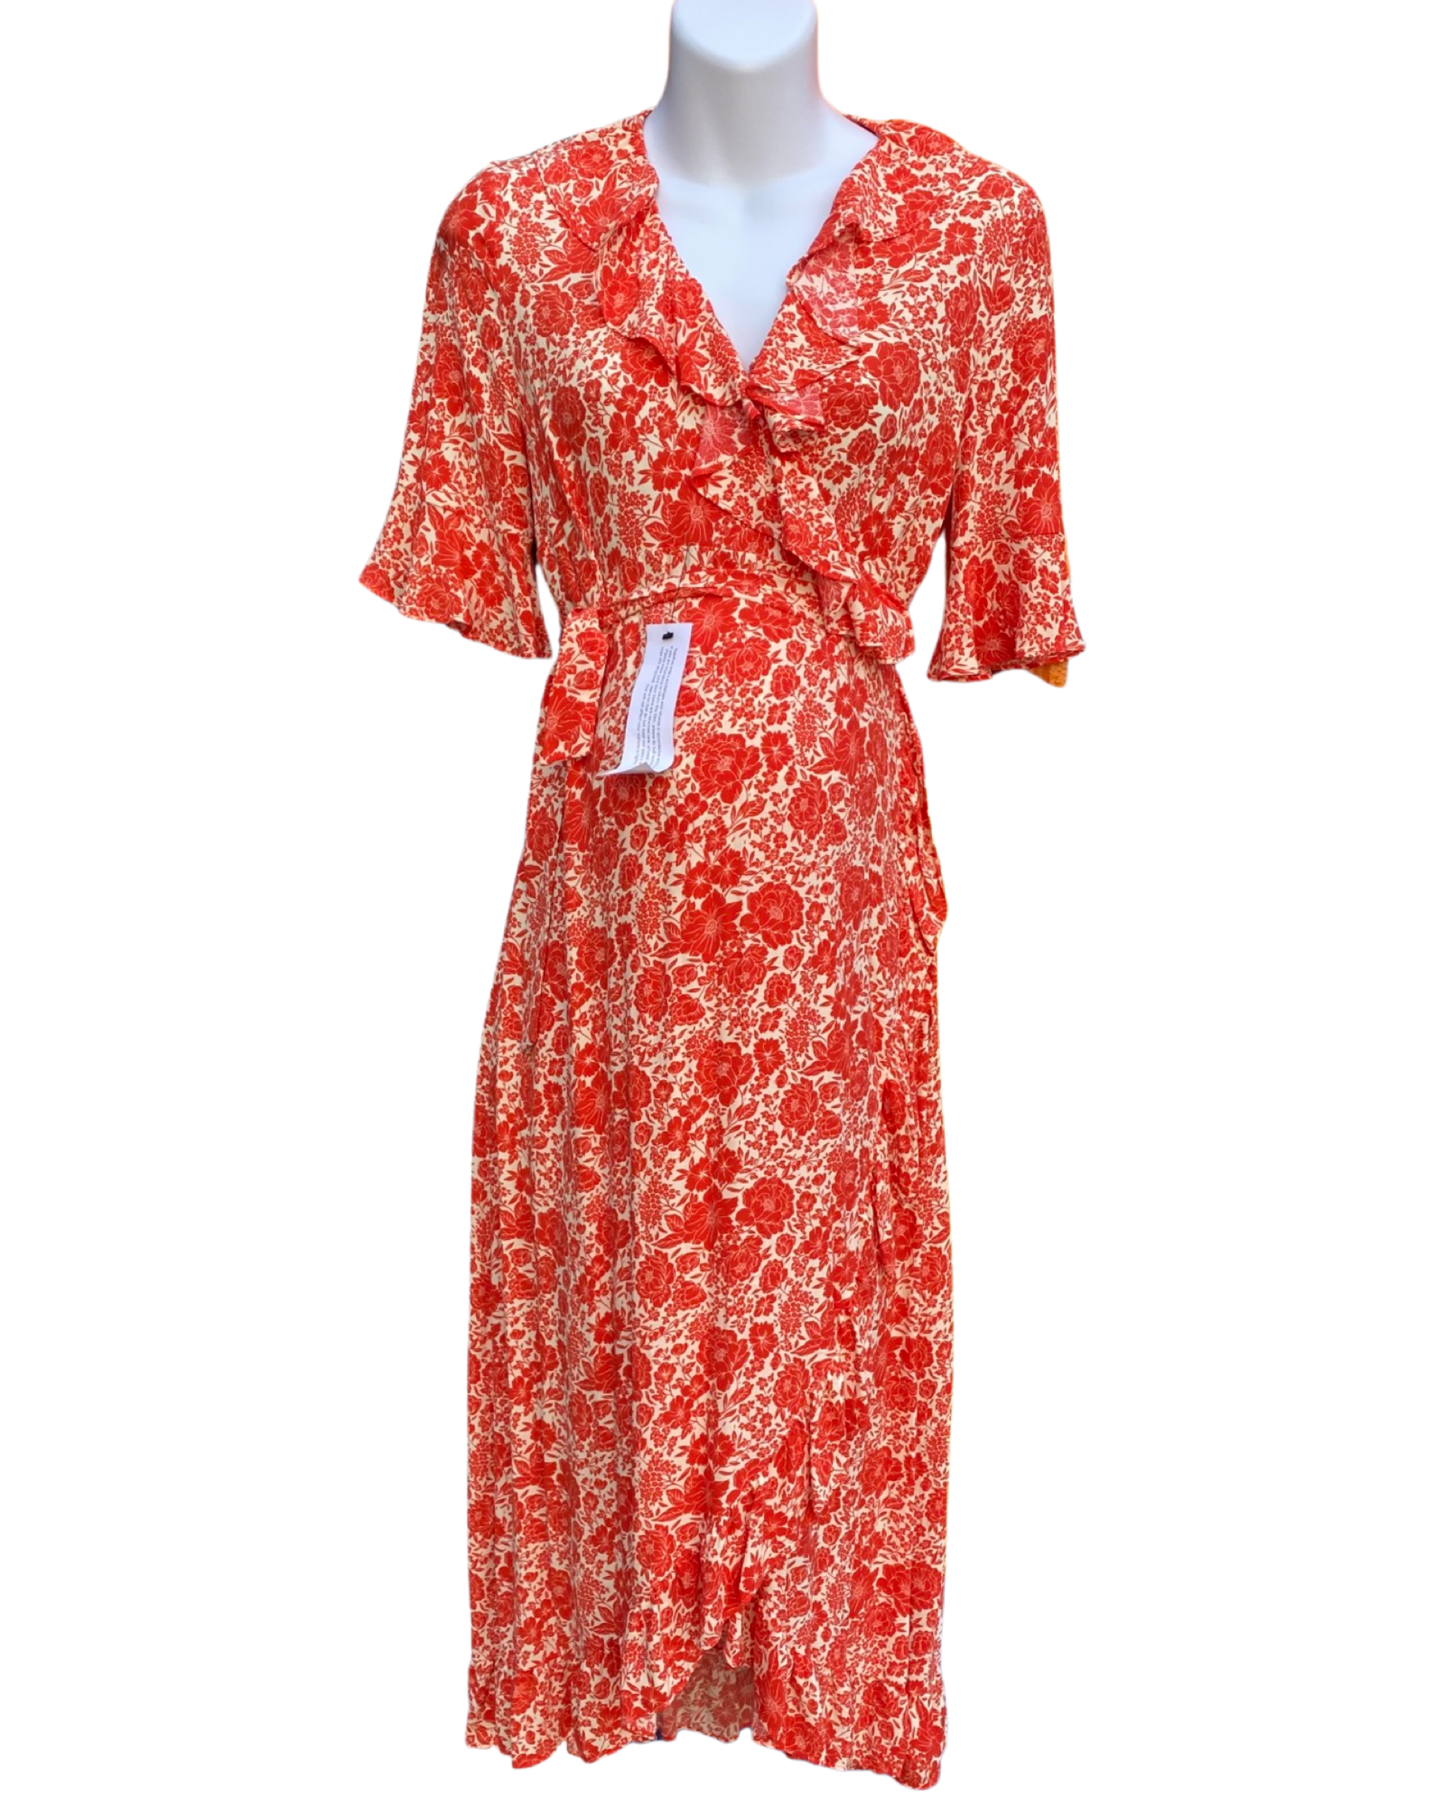 Topshop maternity ditsy floral wrap dress (size 8)